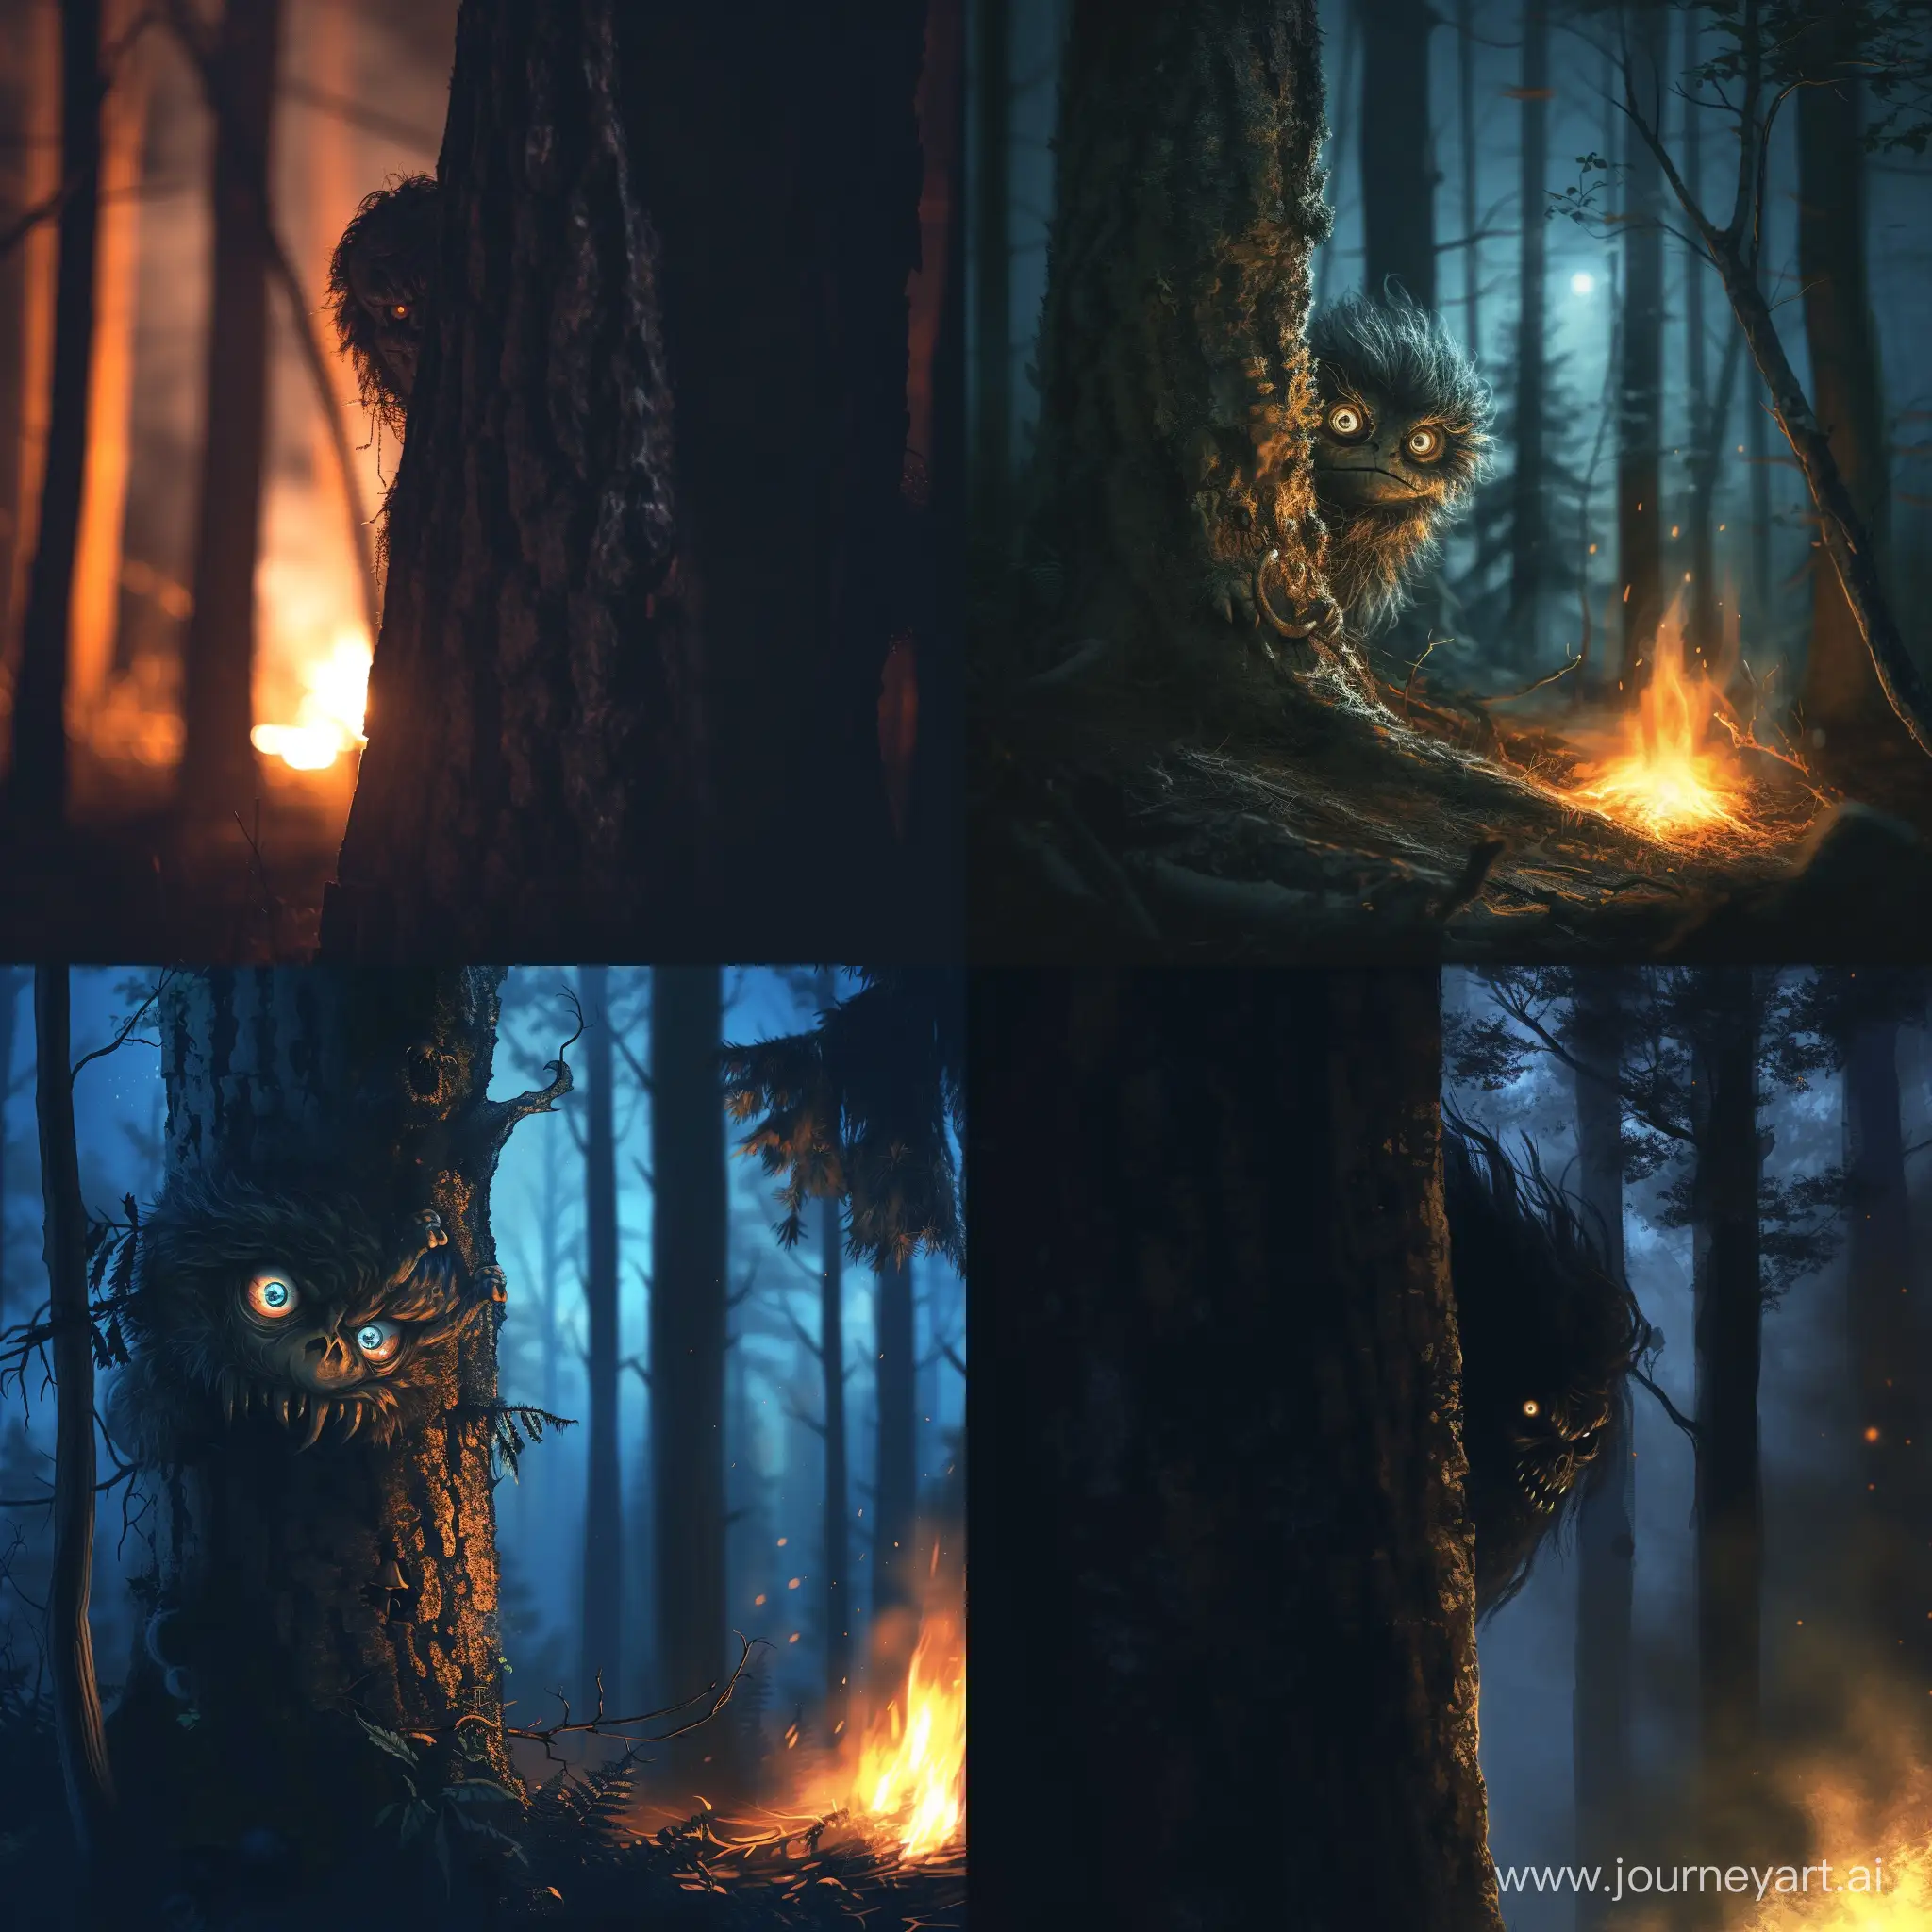 Mysterious-Night-Encounter-Creepy-Monster-Peering-from-Behind-a-Forest-Tree